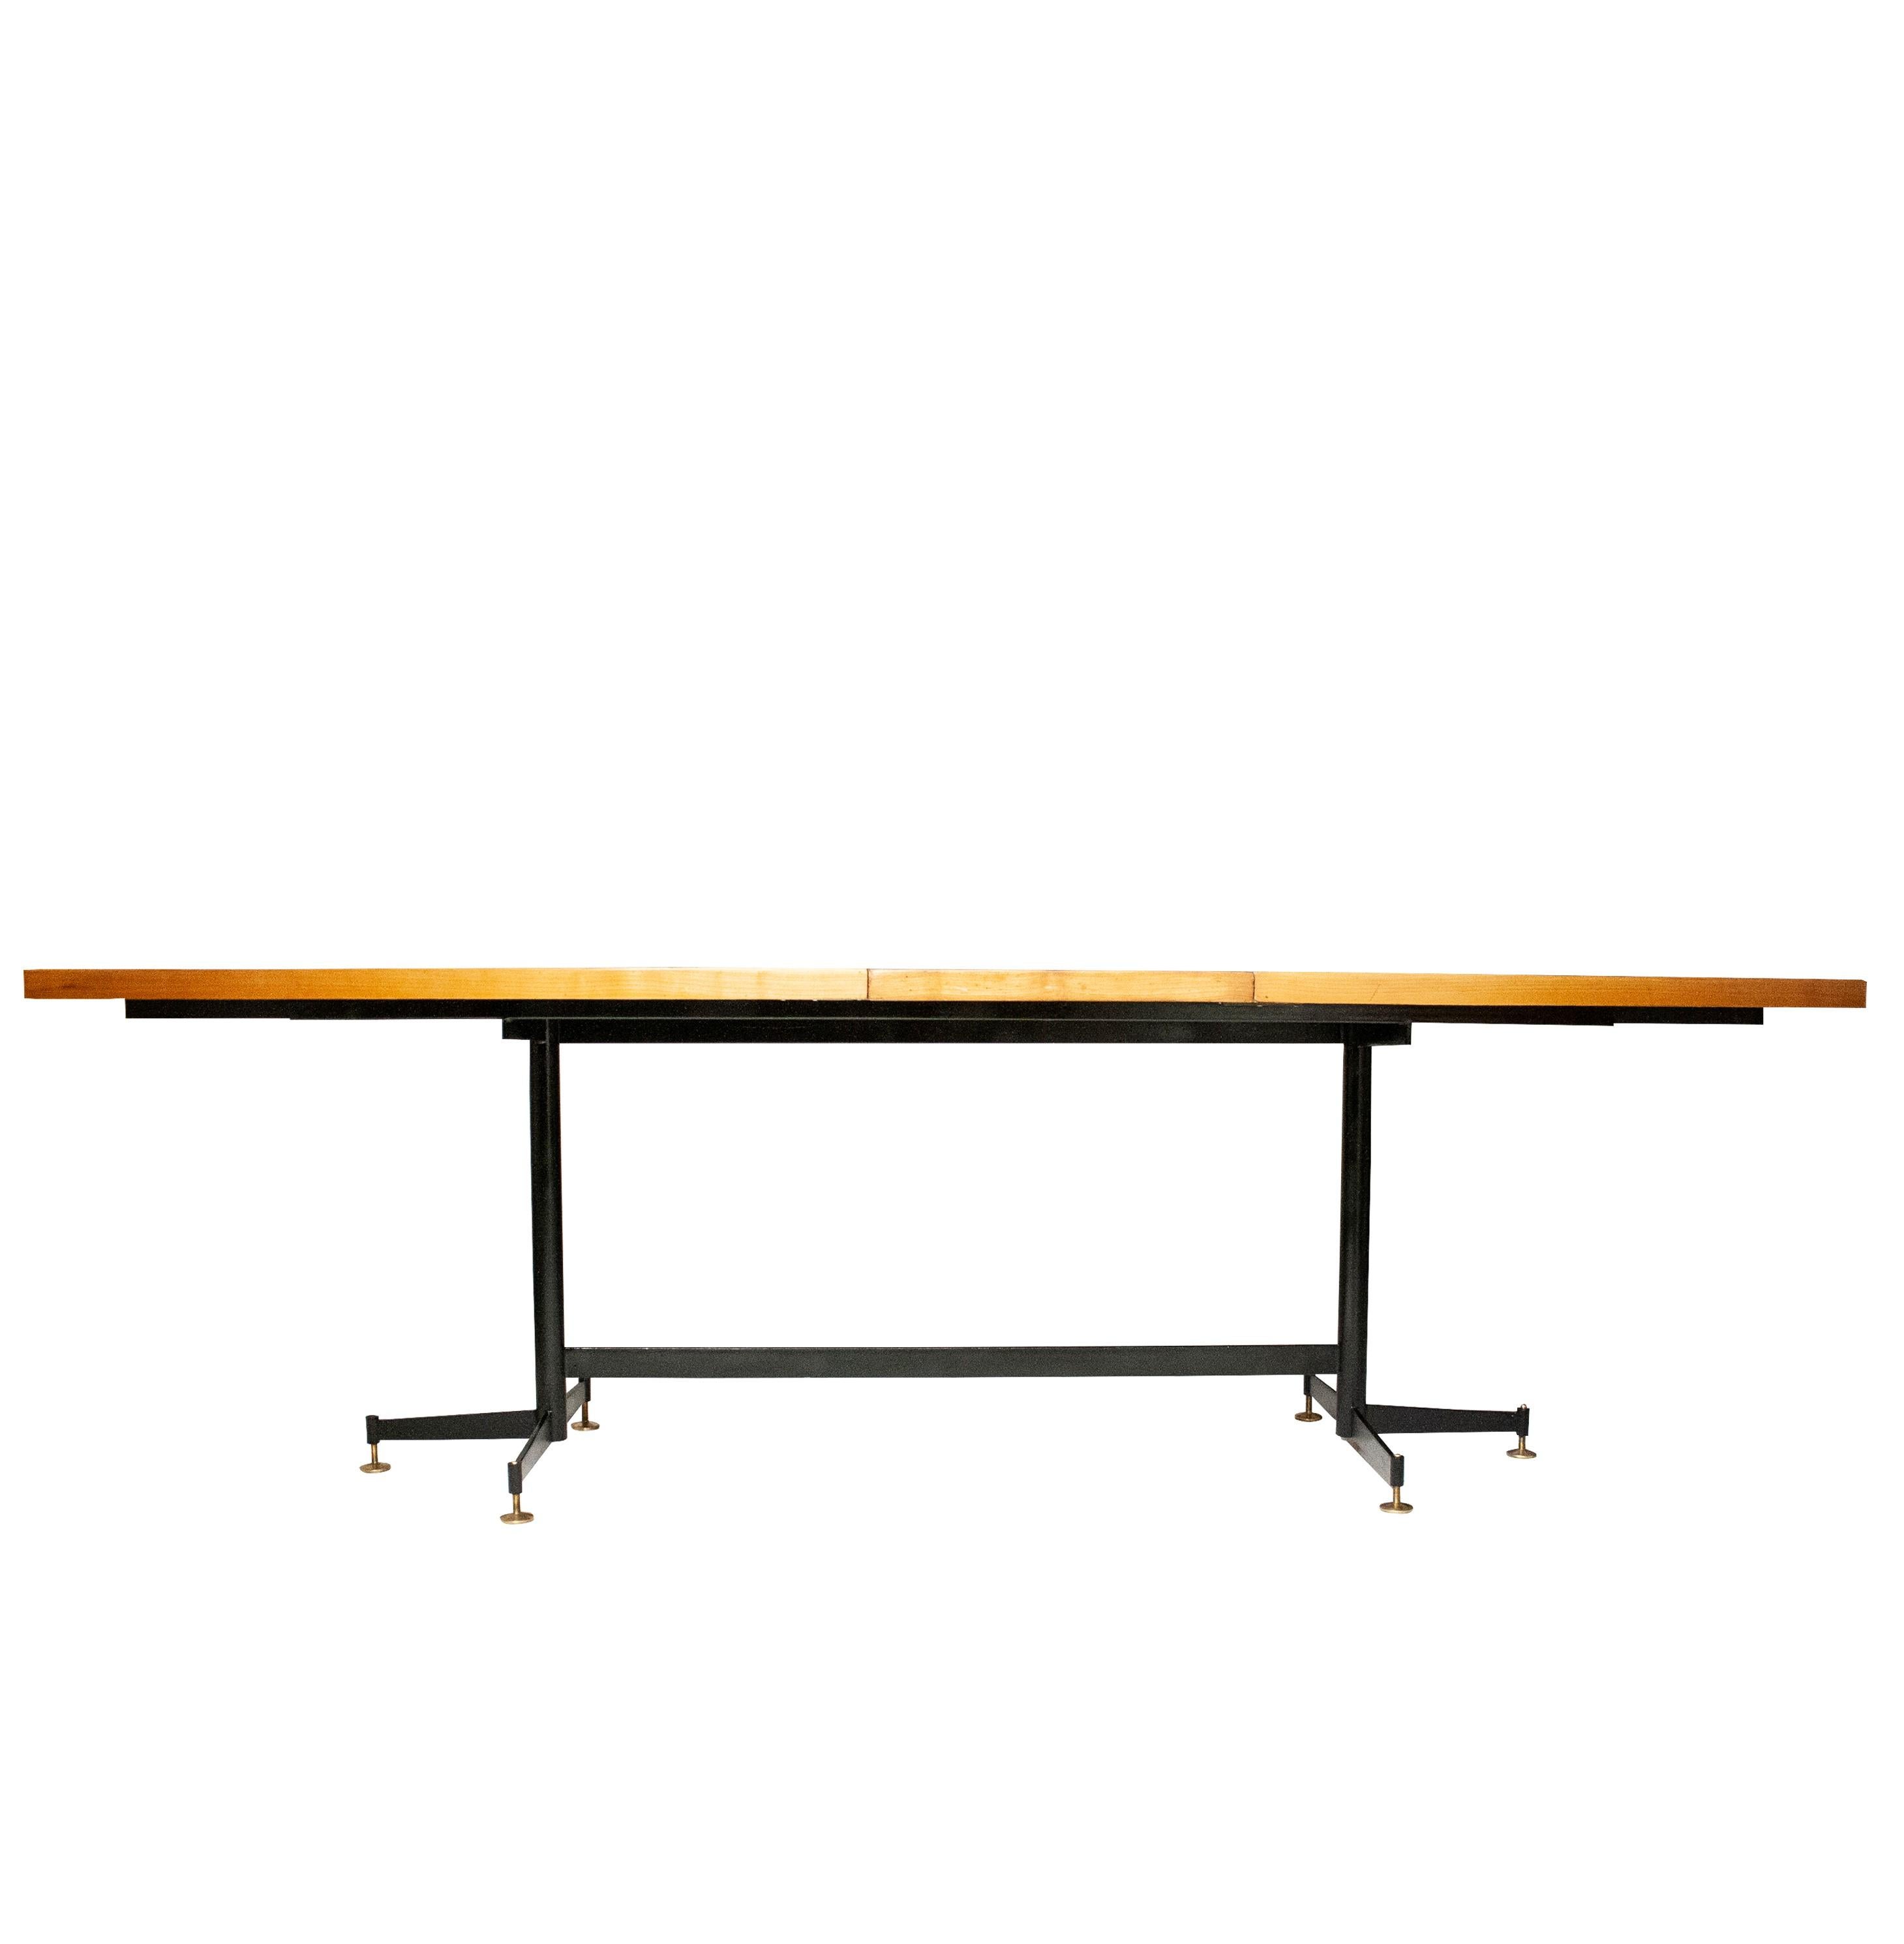 Italian Mid- Century Modern Extendable Table Designed by Luigi Scremin, Italy, 1950. For Sale